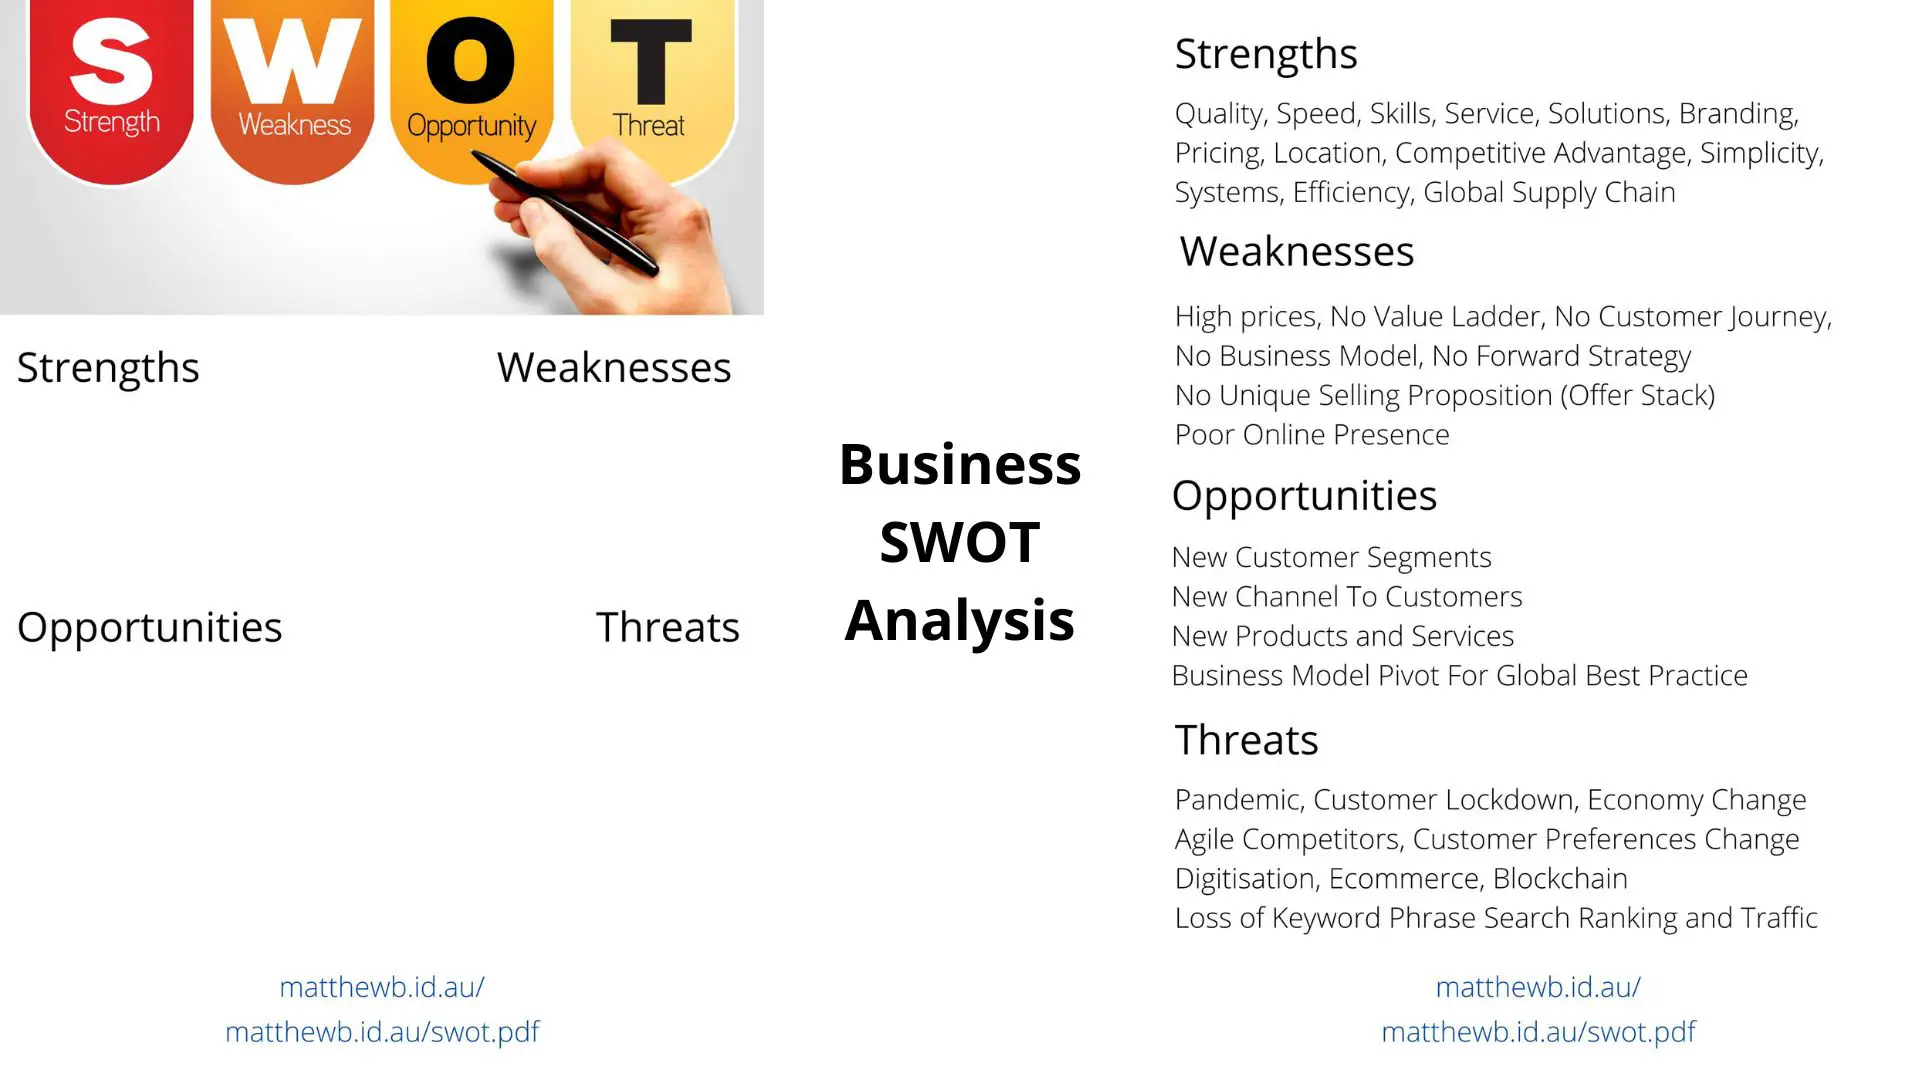 SWOT Business Analysis - Strengths, Weaknesses, Opportunities, Threats